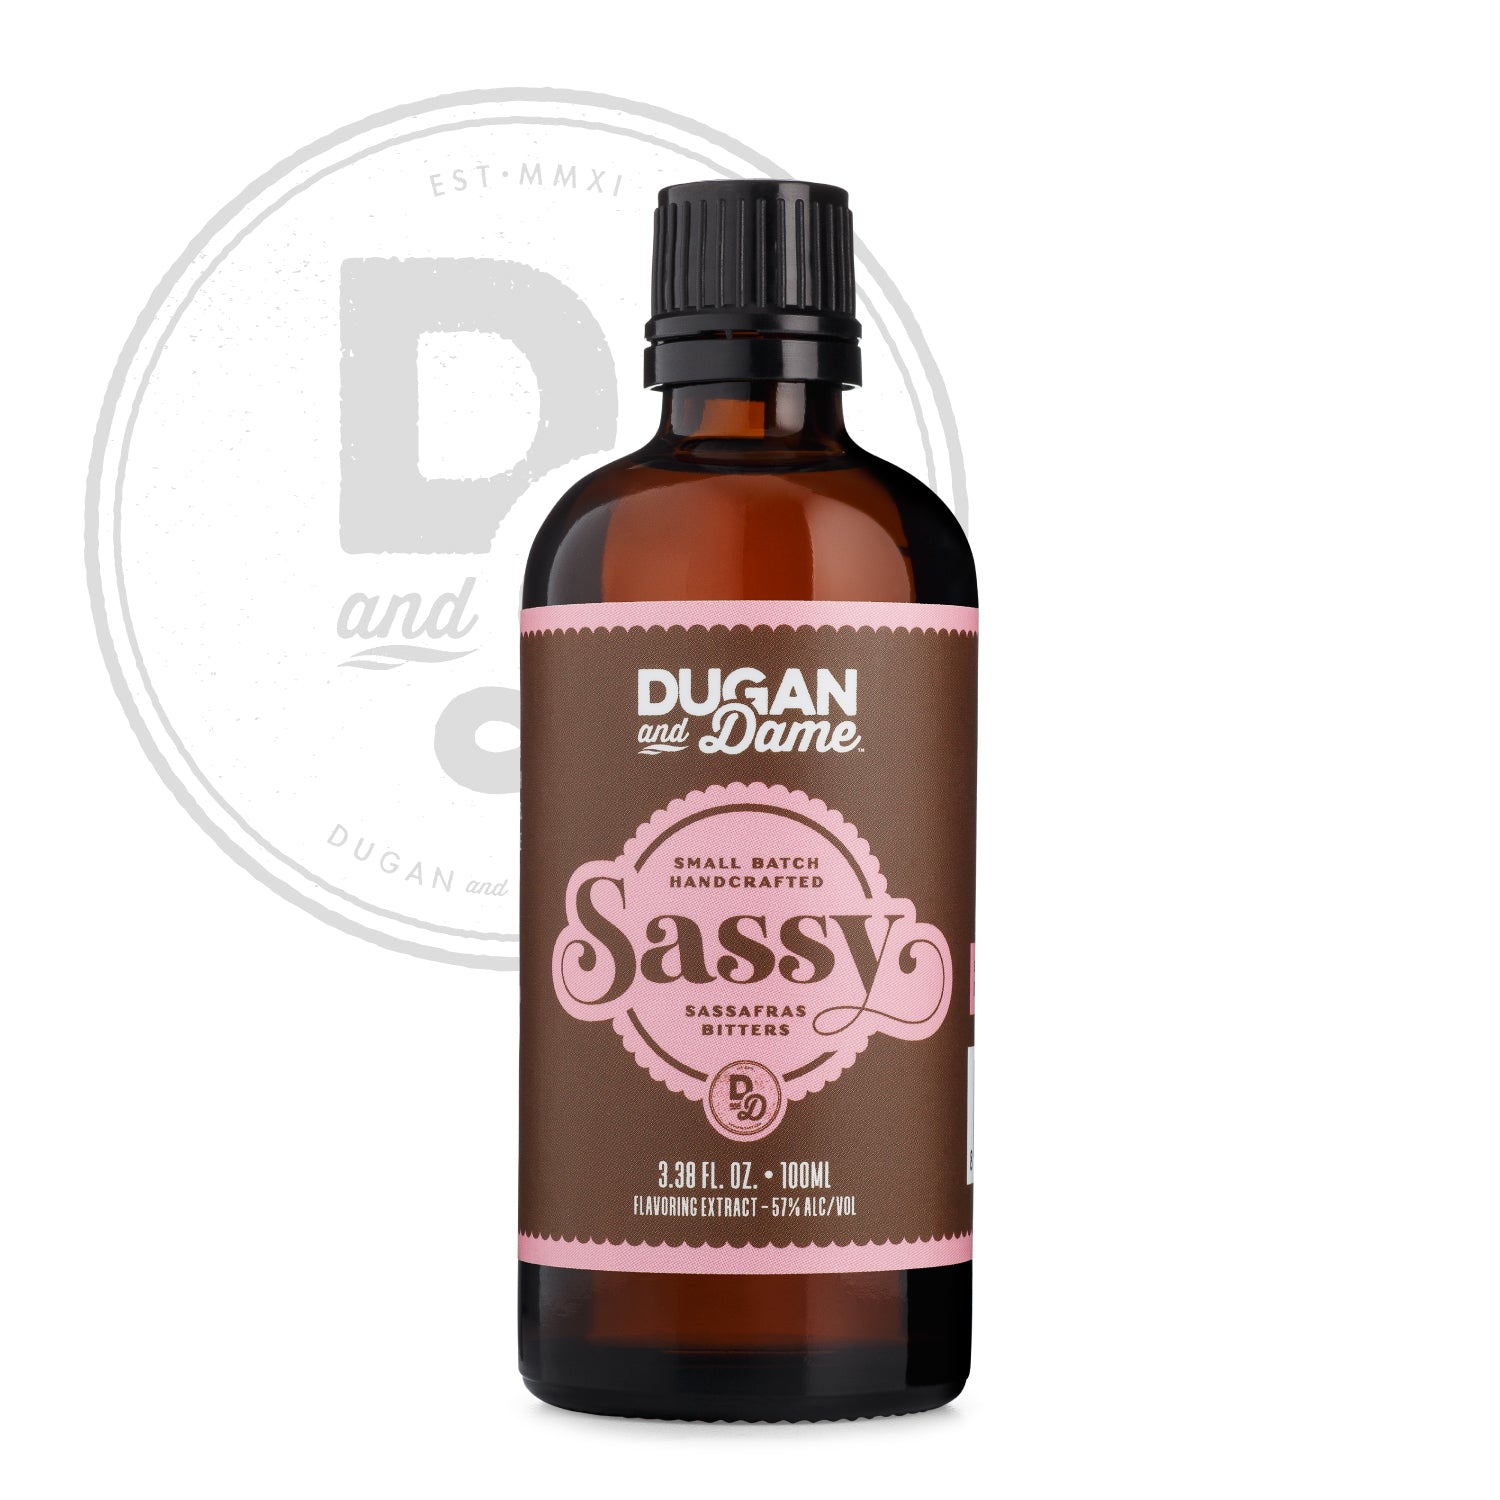 Dugan and Dame Sassy Cocktail Bitters